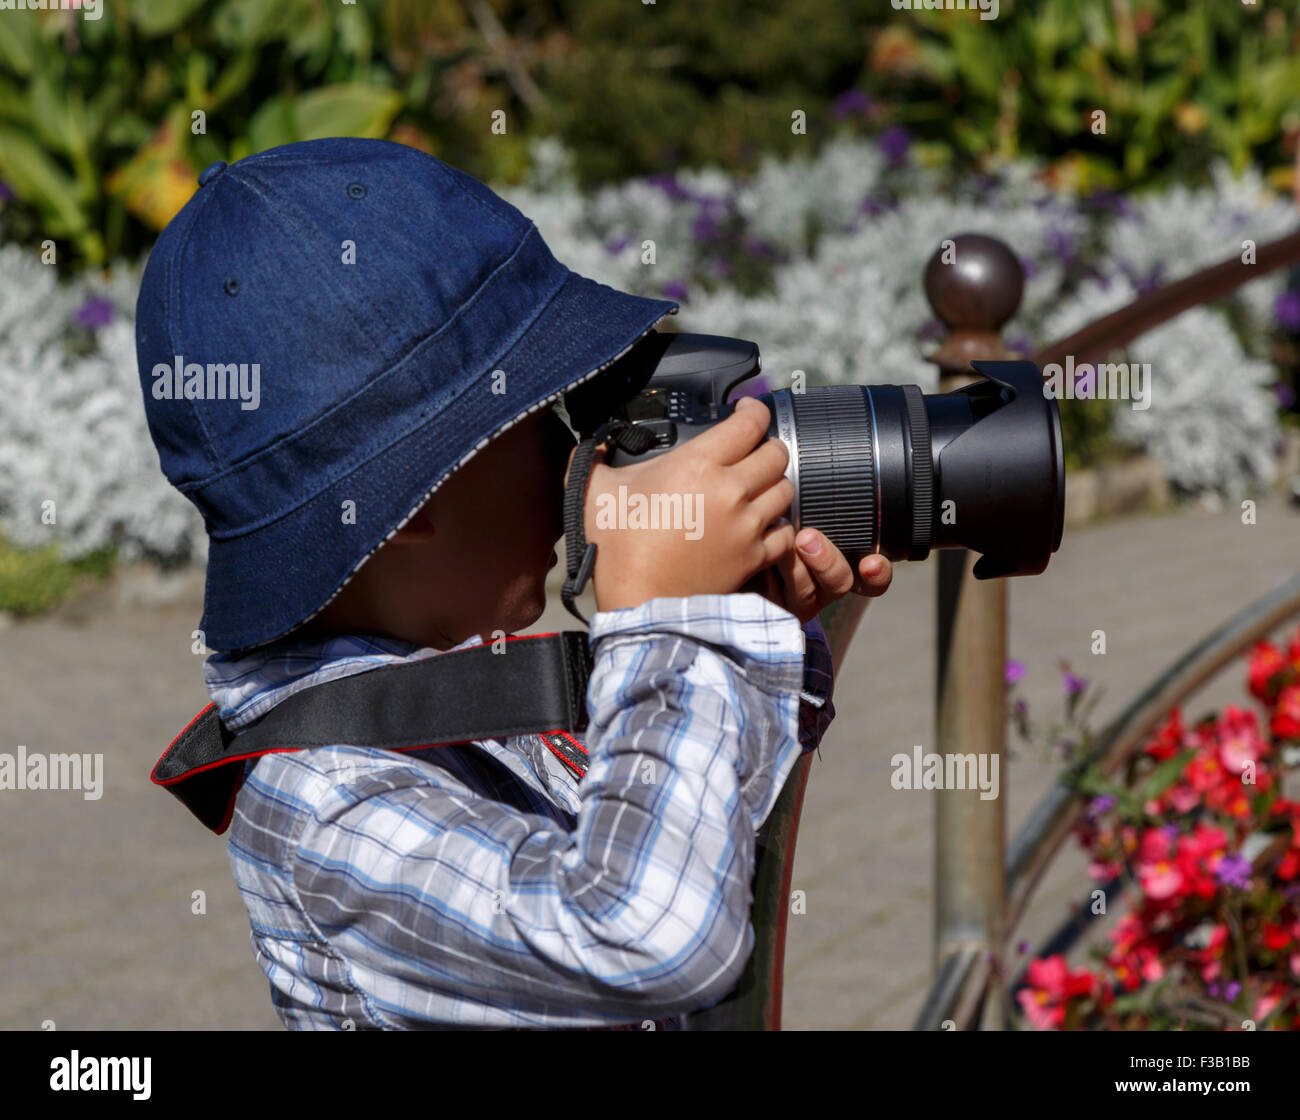 Child taking a photograph with a large camera at the Star Pond Butchart Gardens Vancouver Island Canada Stock Photo